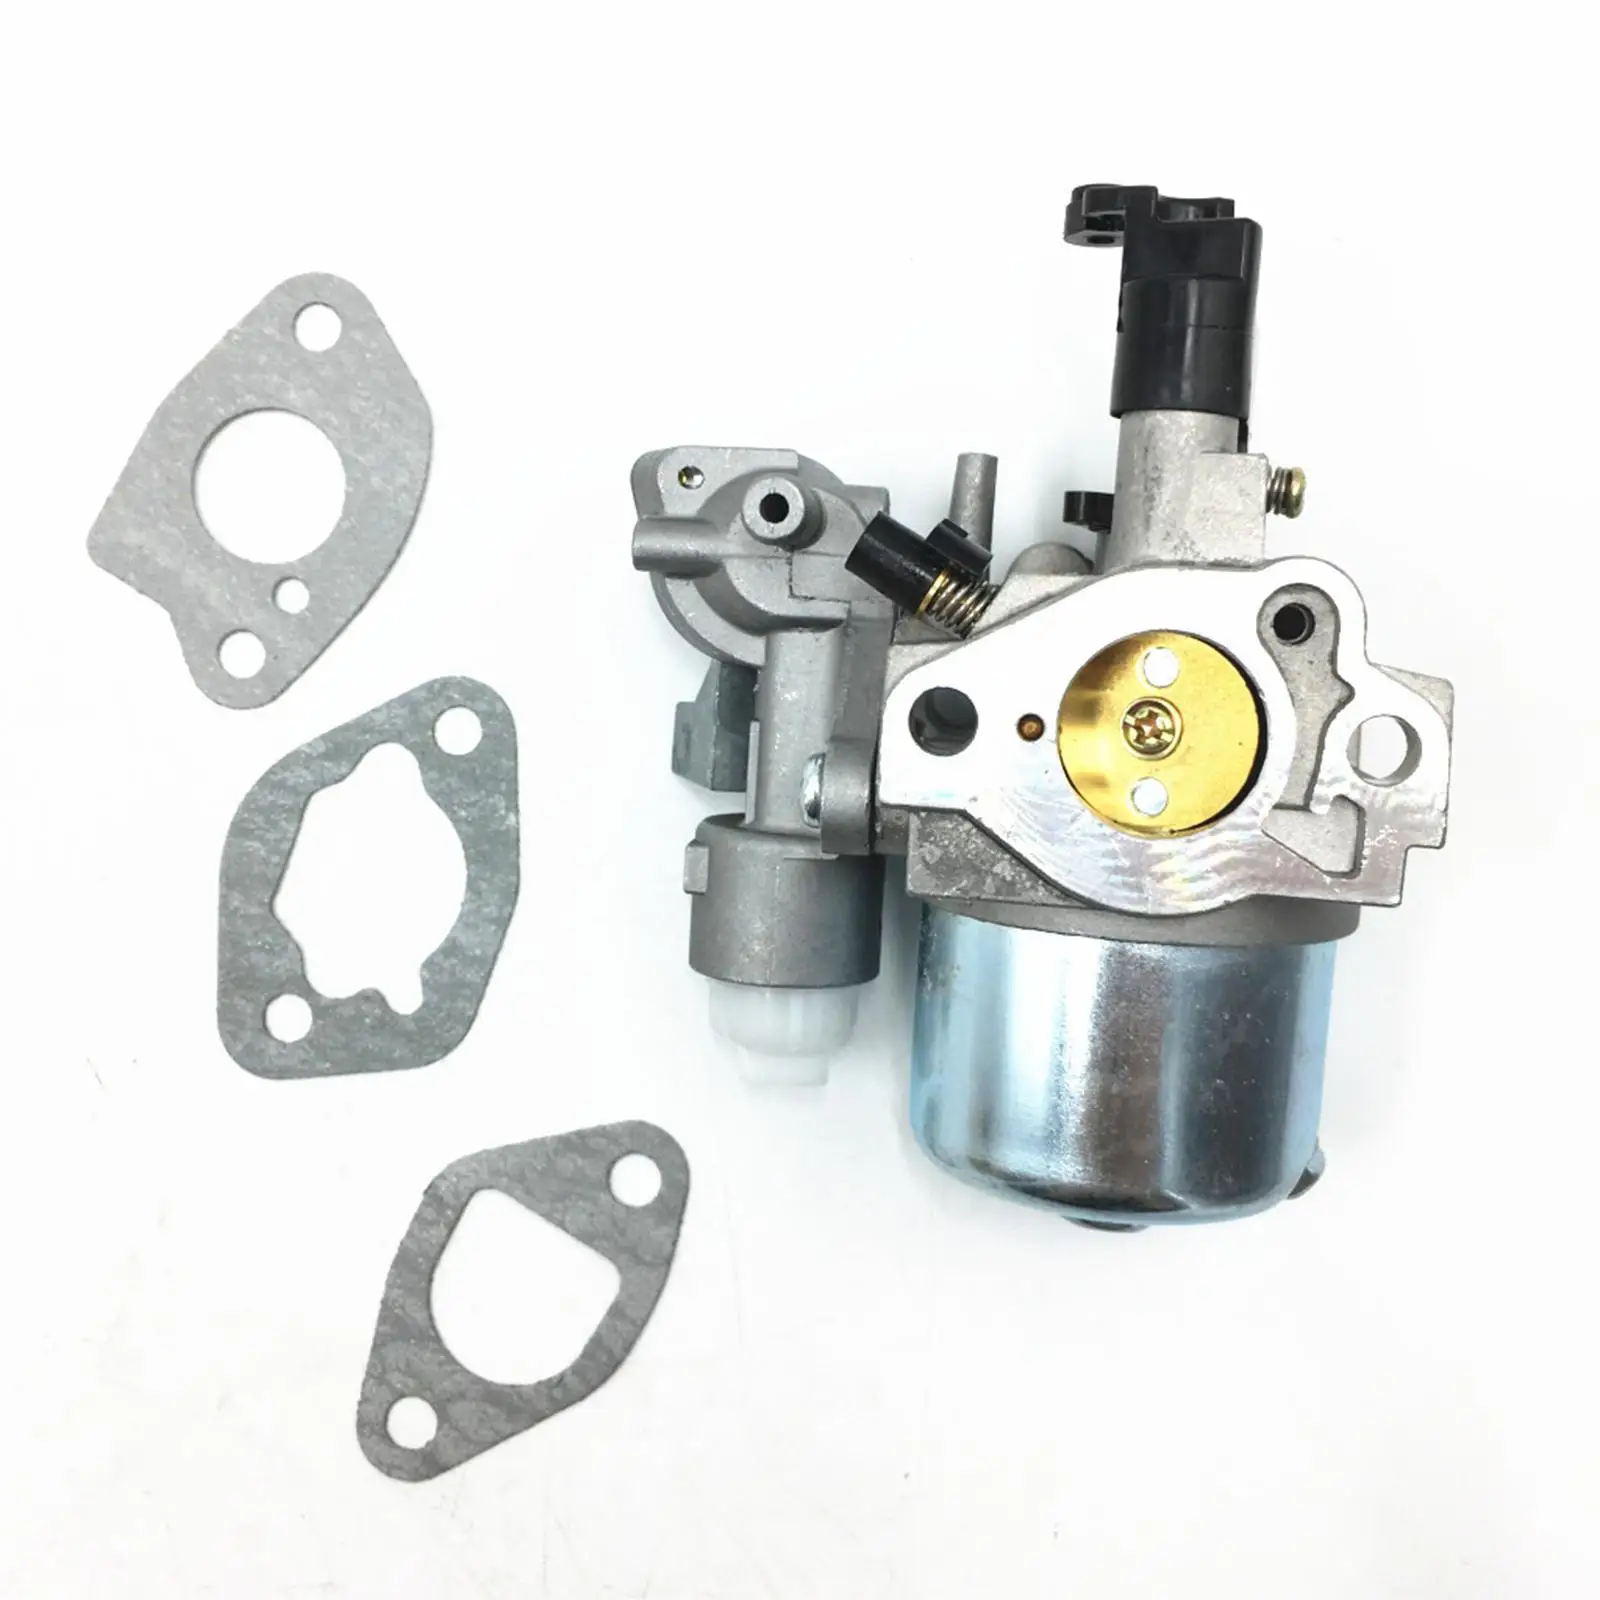 Carburetor Accessory Replaces Parts Durable Practical Portable Easy to Install